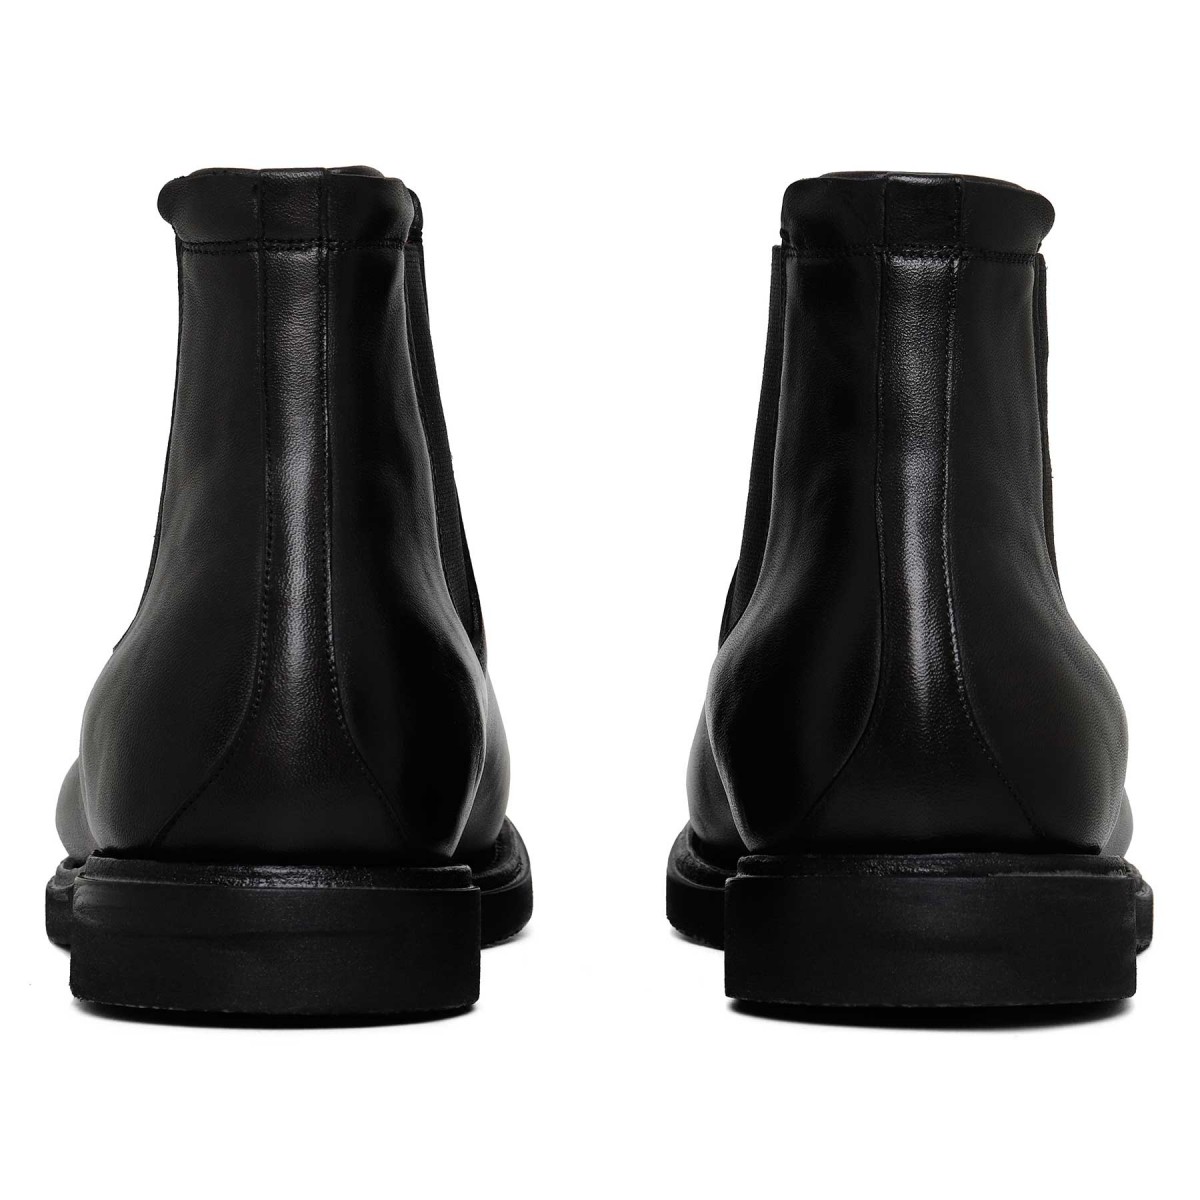 Black leather Beatles ankle boots